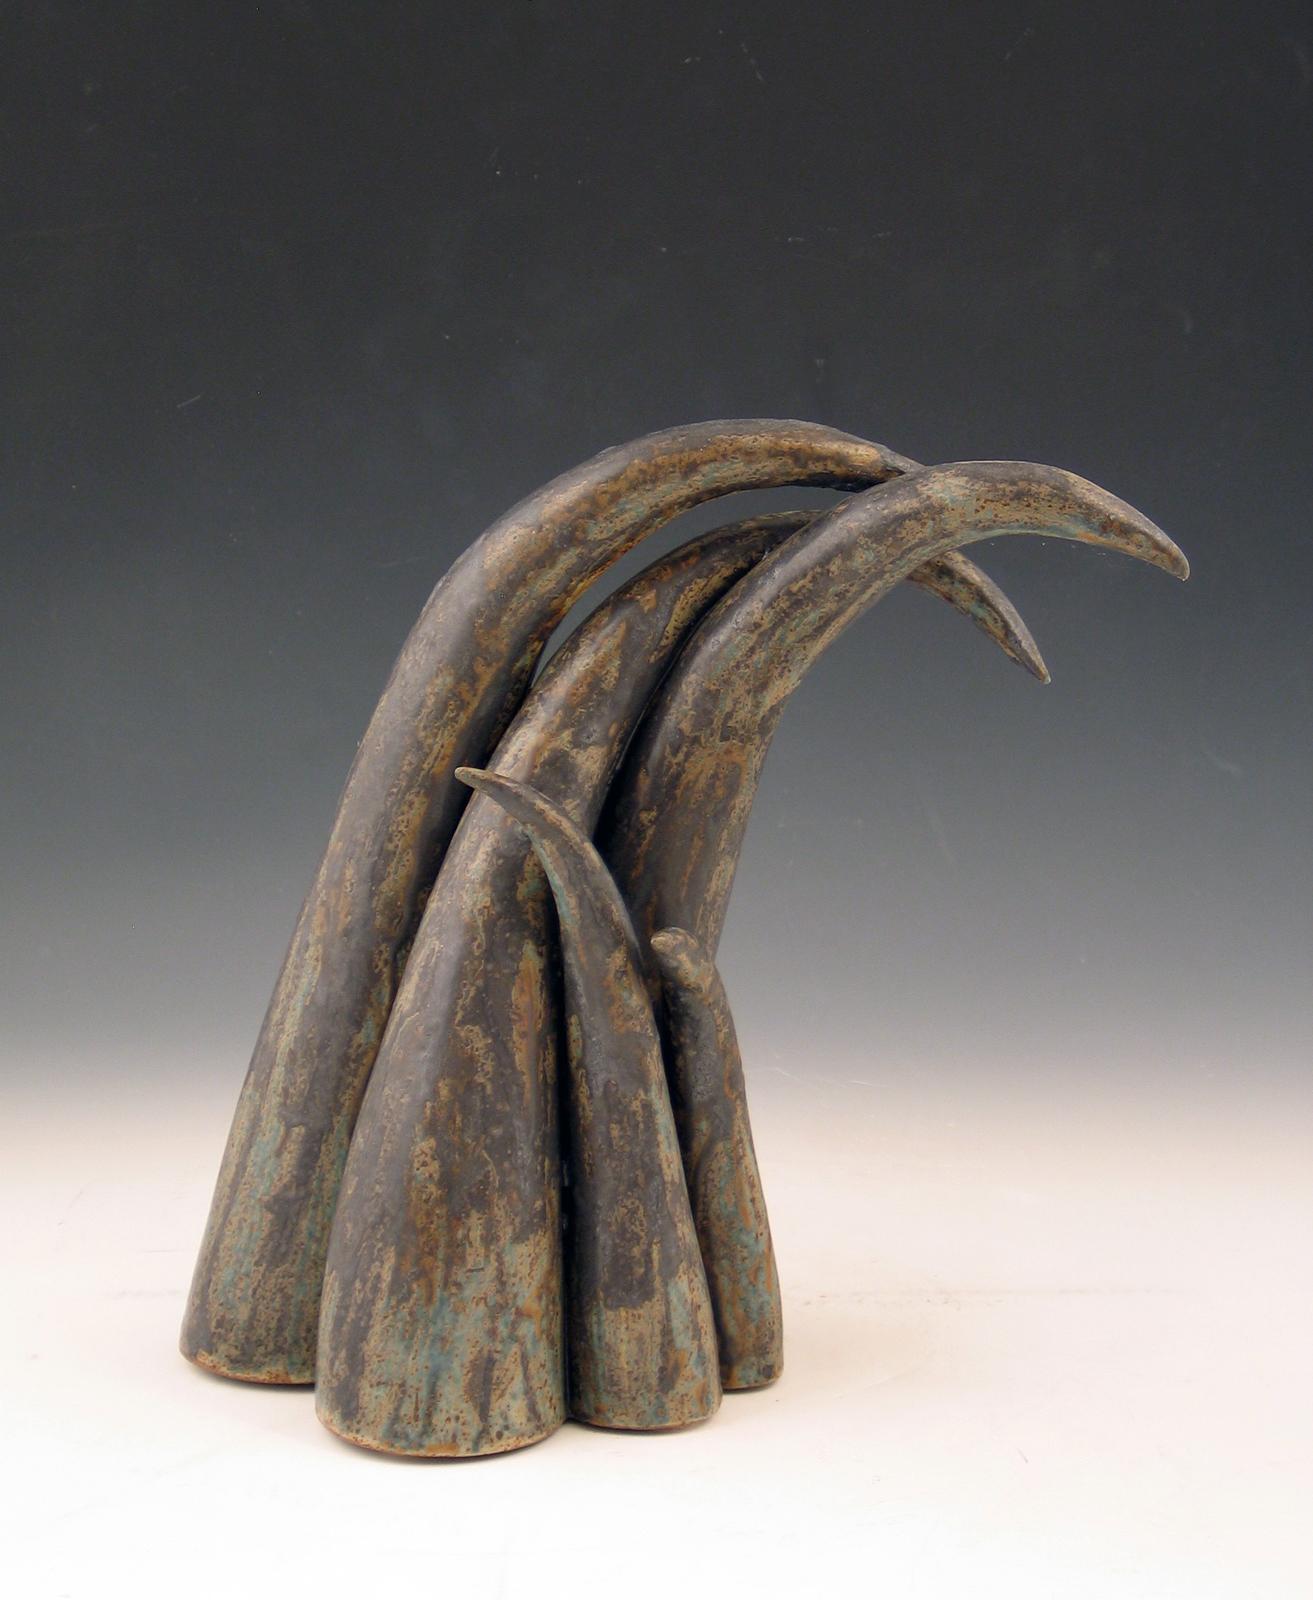 Elaine Lorenz Abstract Sculpture - “Moving On”, sheaf of curved ceramic forms in deep browns